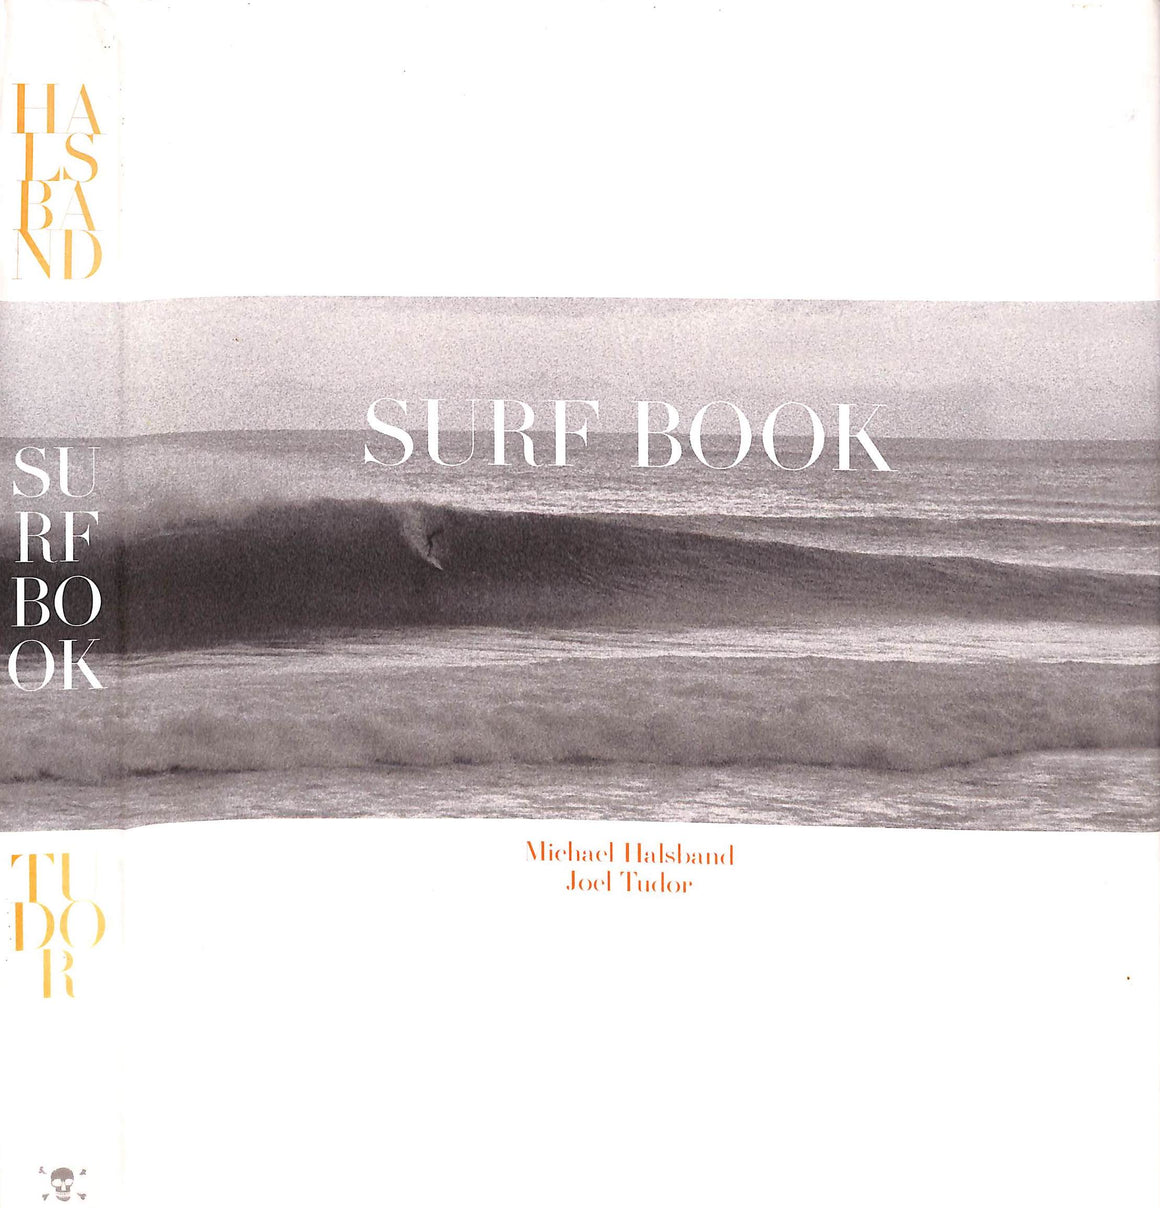 "Surf Book" 2004 TUDOR, Joel [text by] (SOLD)